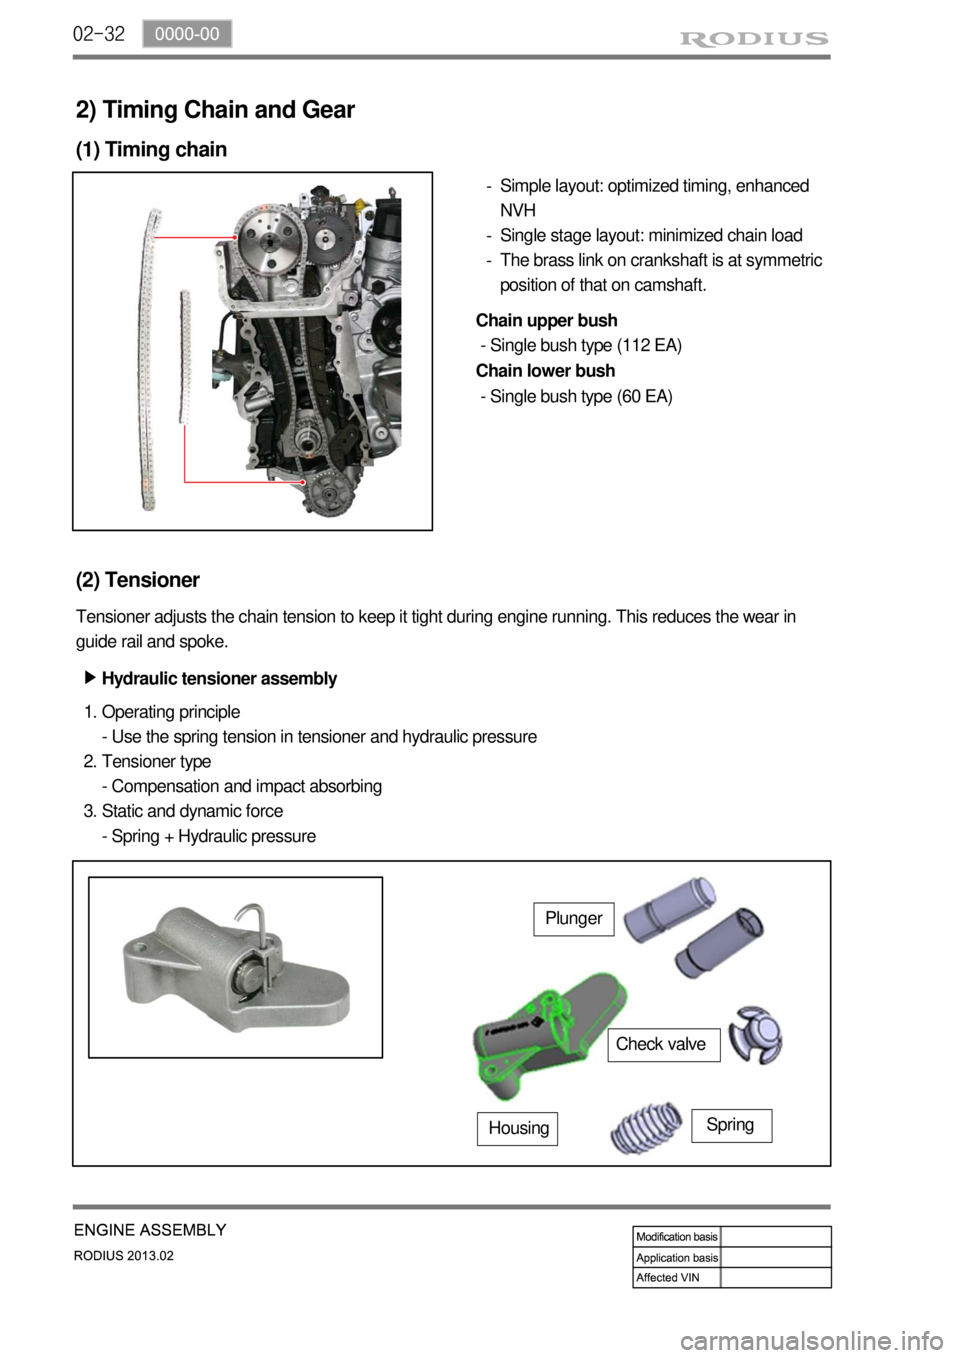 SSANGYONG TURISMO 2013  Service Manual 02-32
2) Timing Chain and Gear
(1) Timing chain
Simple layout: optimized timing, enhanced 
NVH
Single stage layout: minimized chain load
The brass link on crankshaft is at symmetric 
position of that 